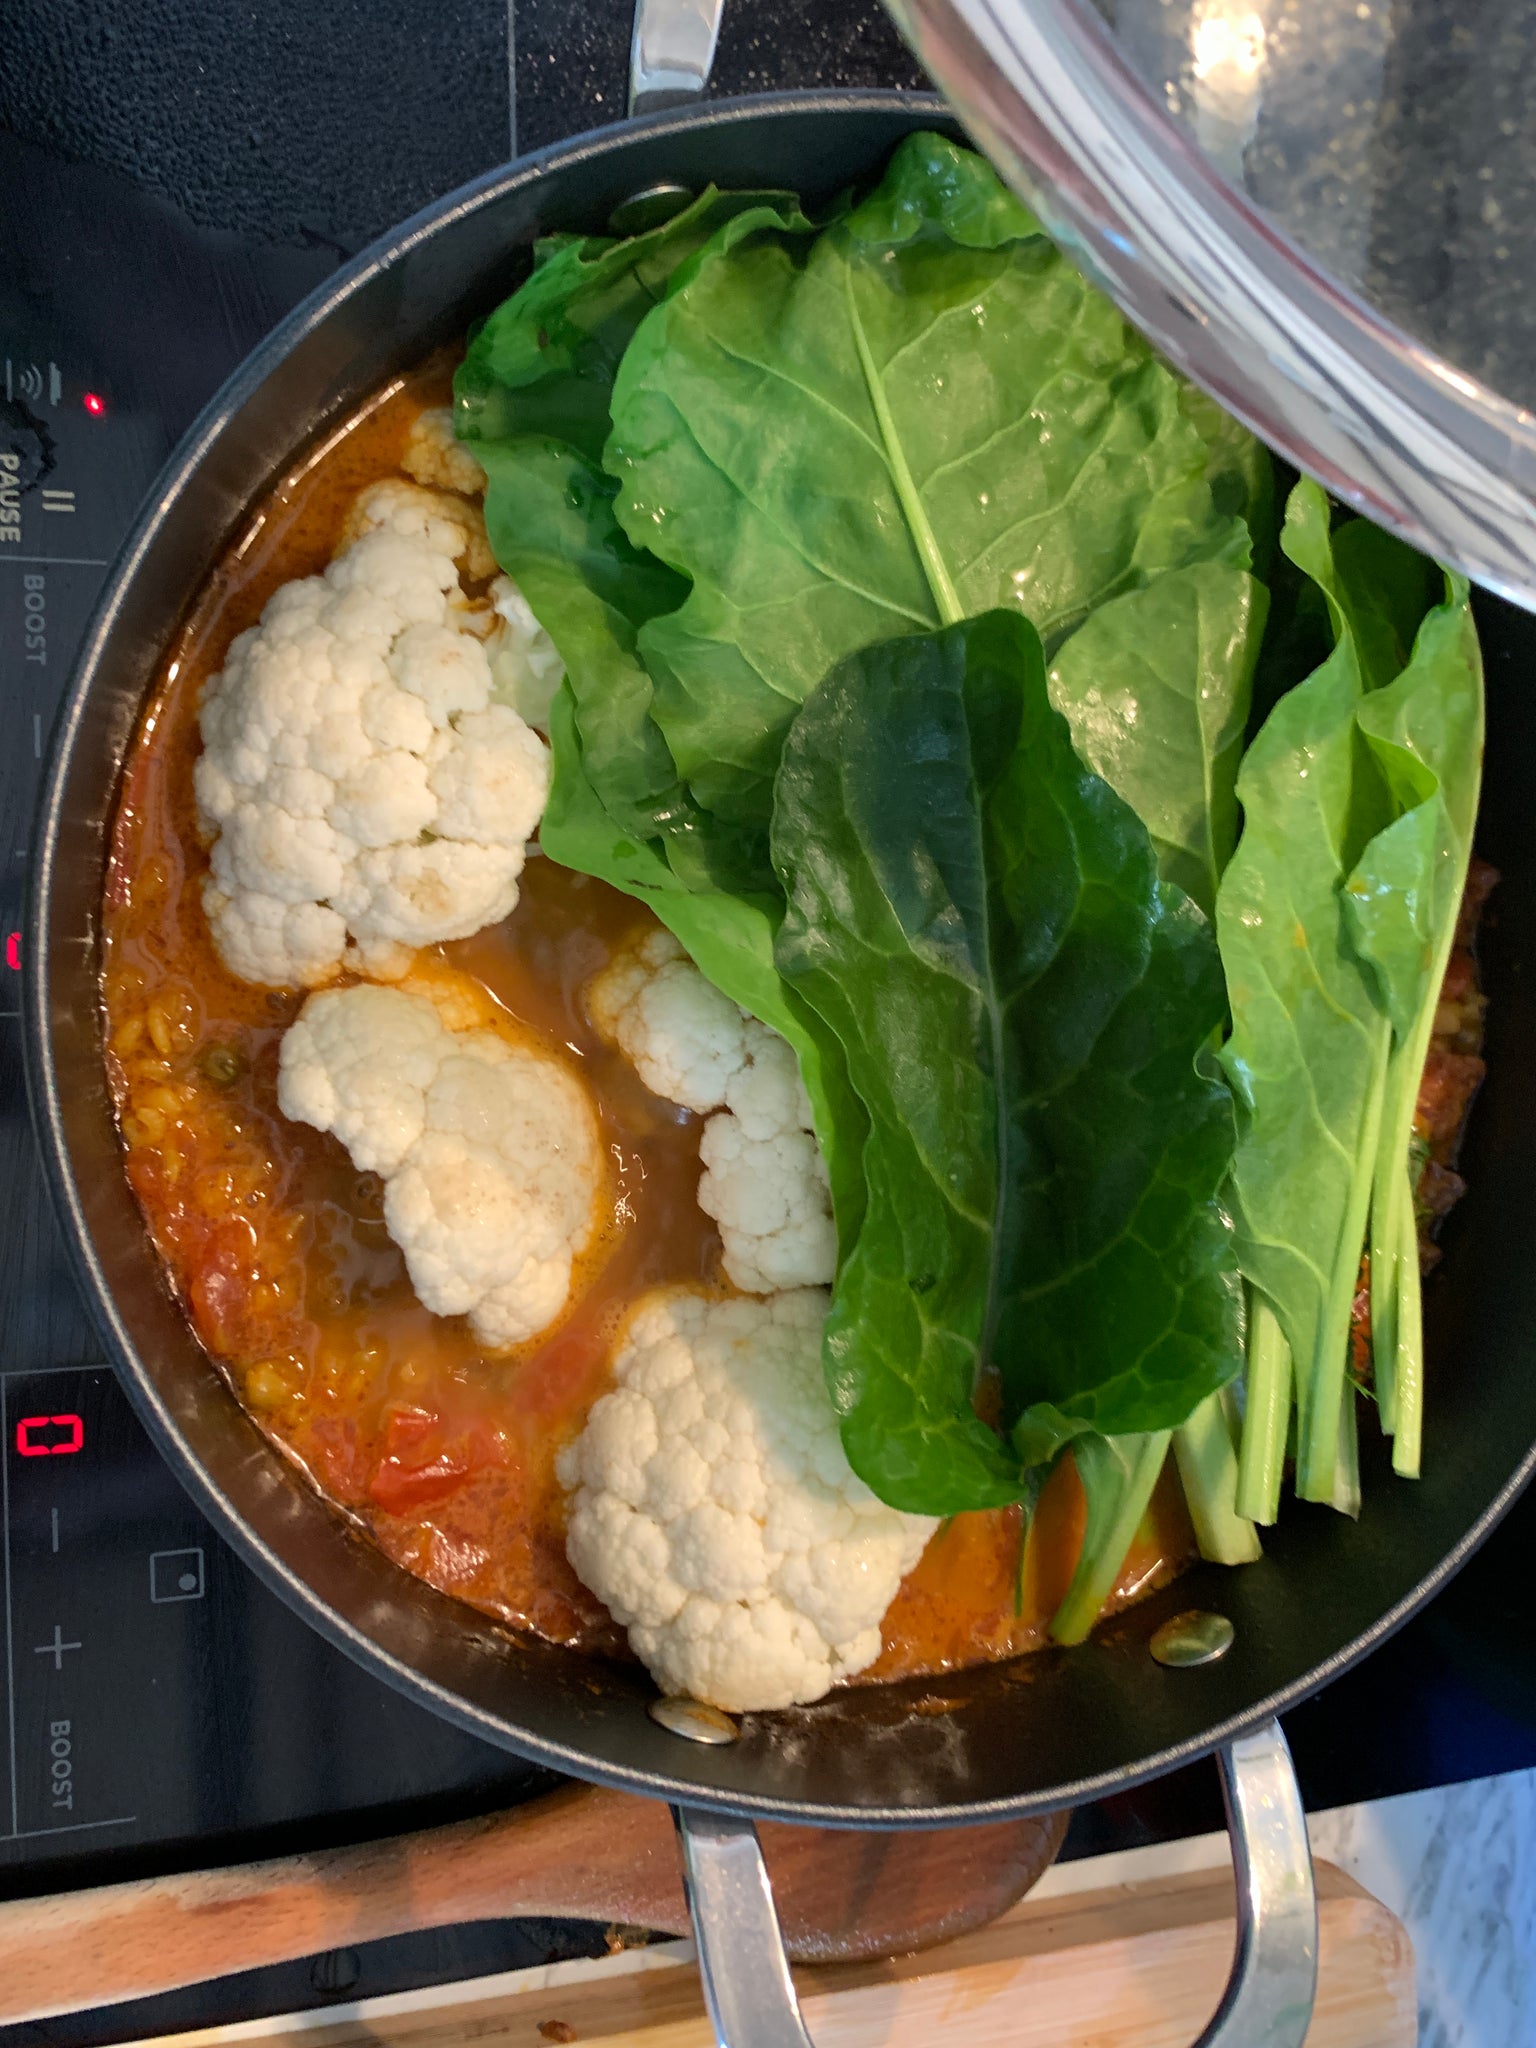 cooking suggestion is to add some beautiful garden spinach and cauliflower. You can add whatever veg you like to kitchari